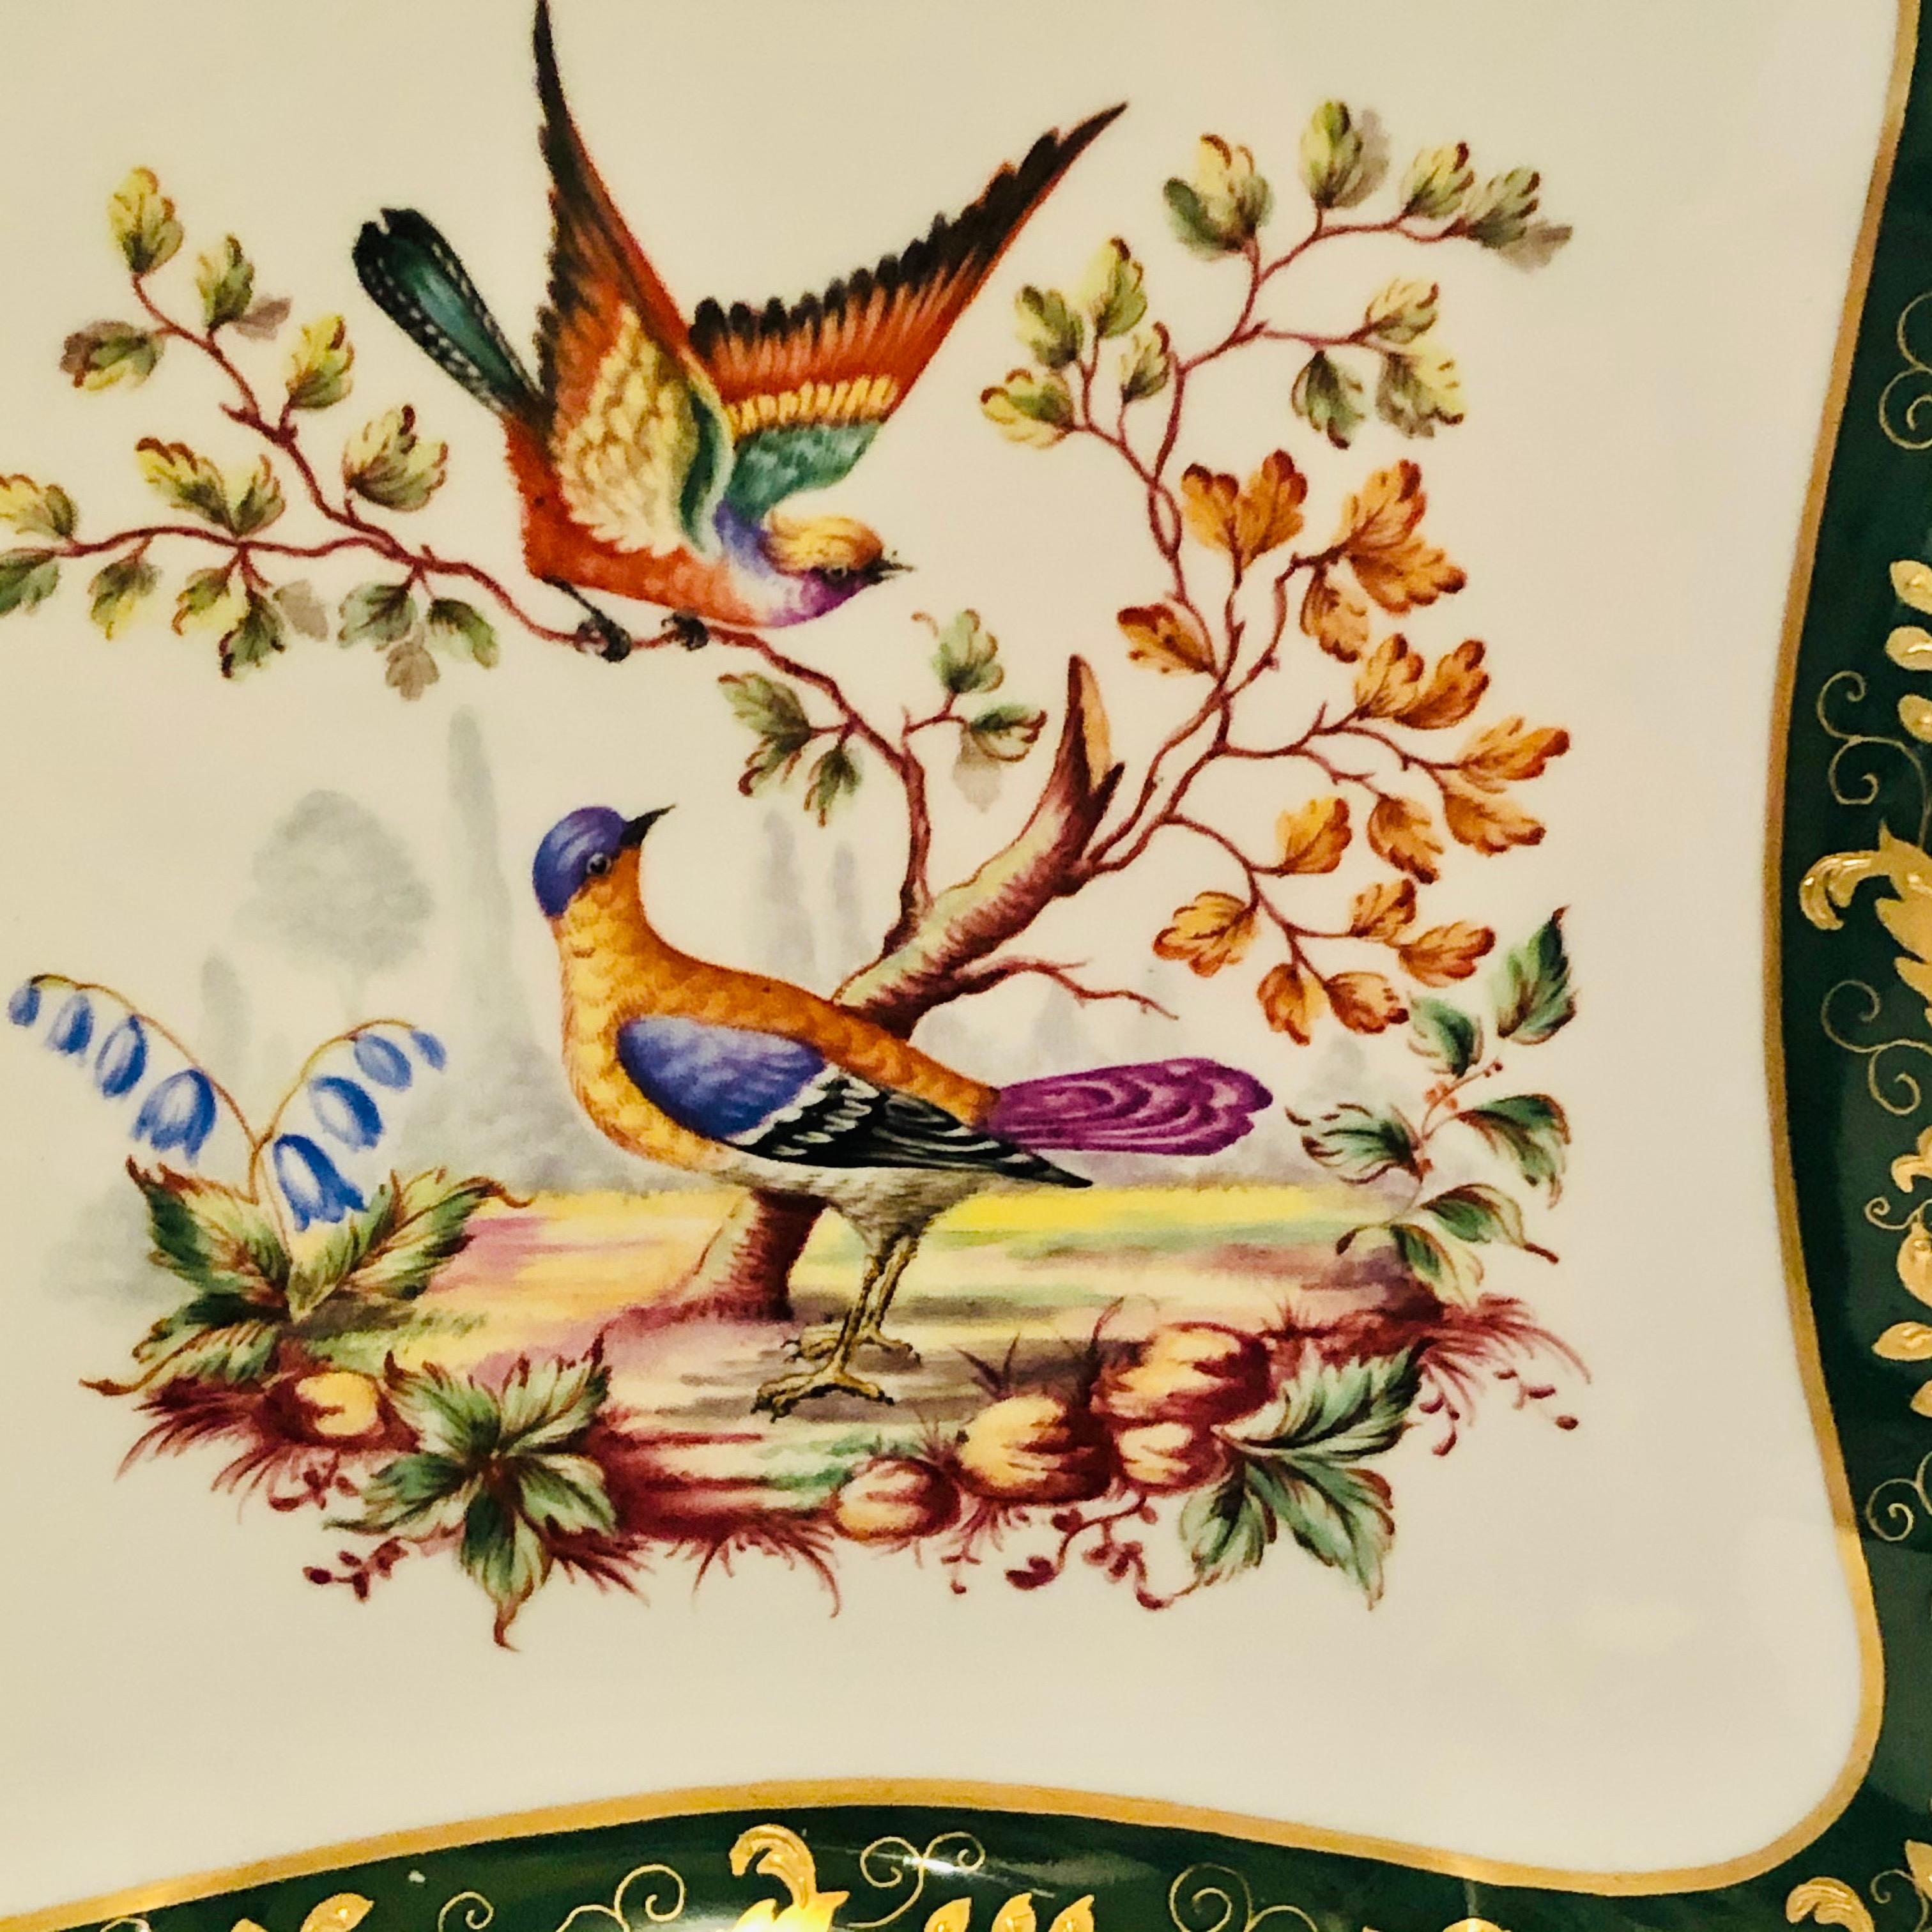 Le Tallec Green Bowl Painted with Colorful Birds with a Raised Gold Border 1